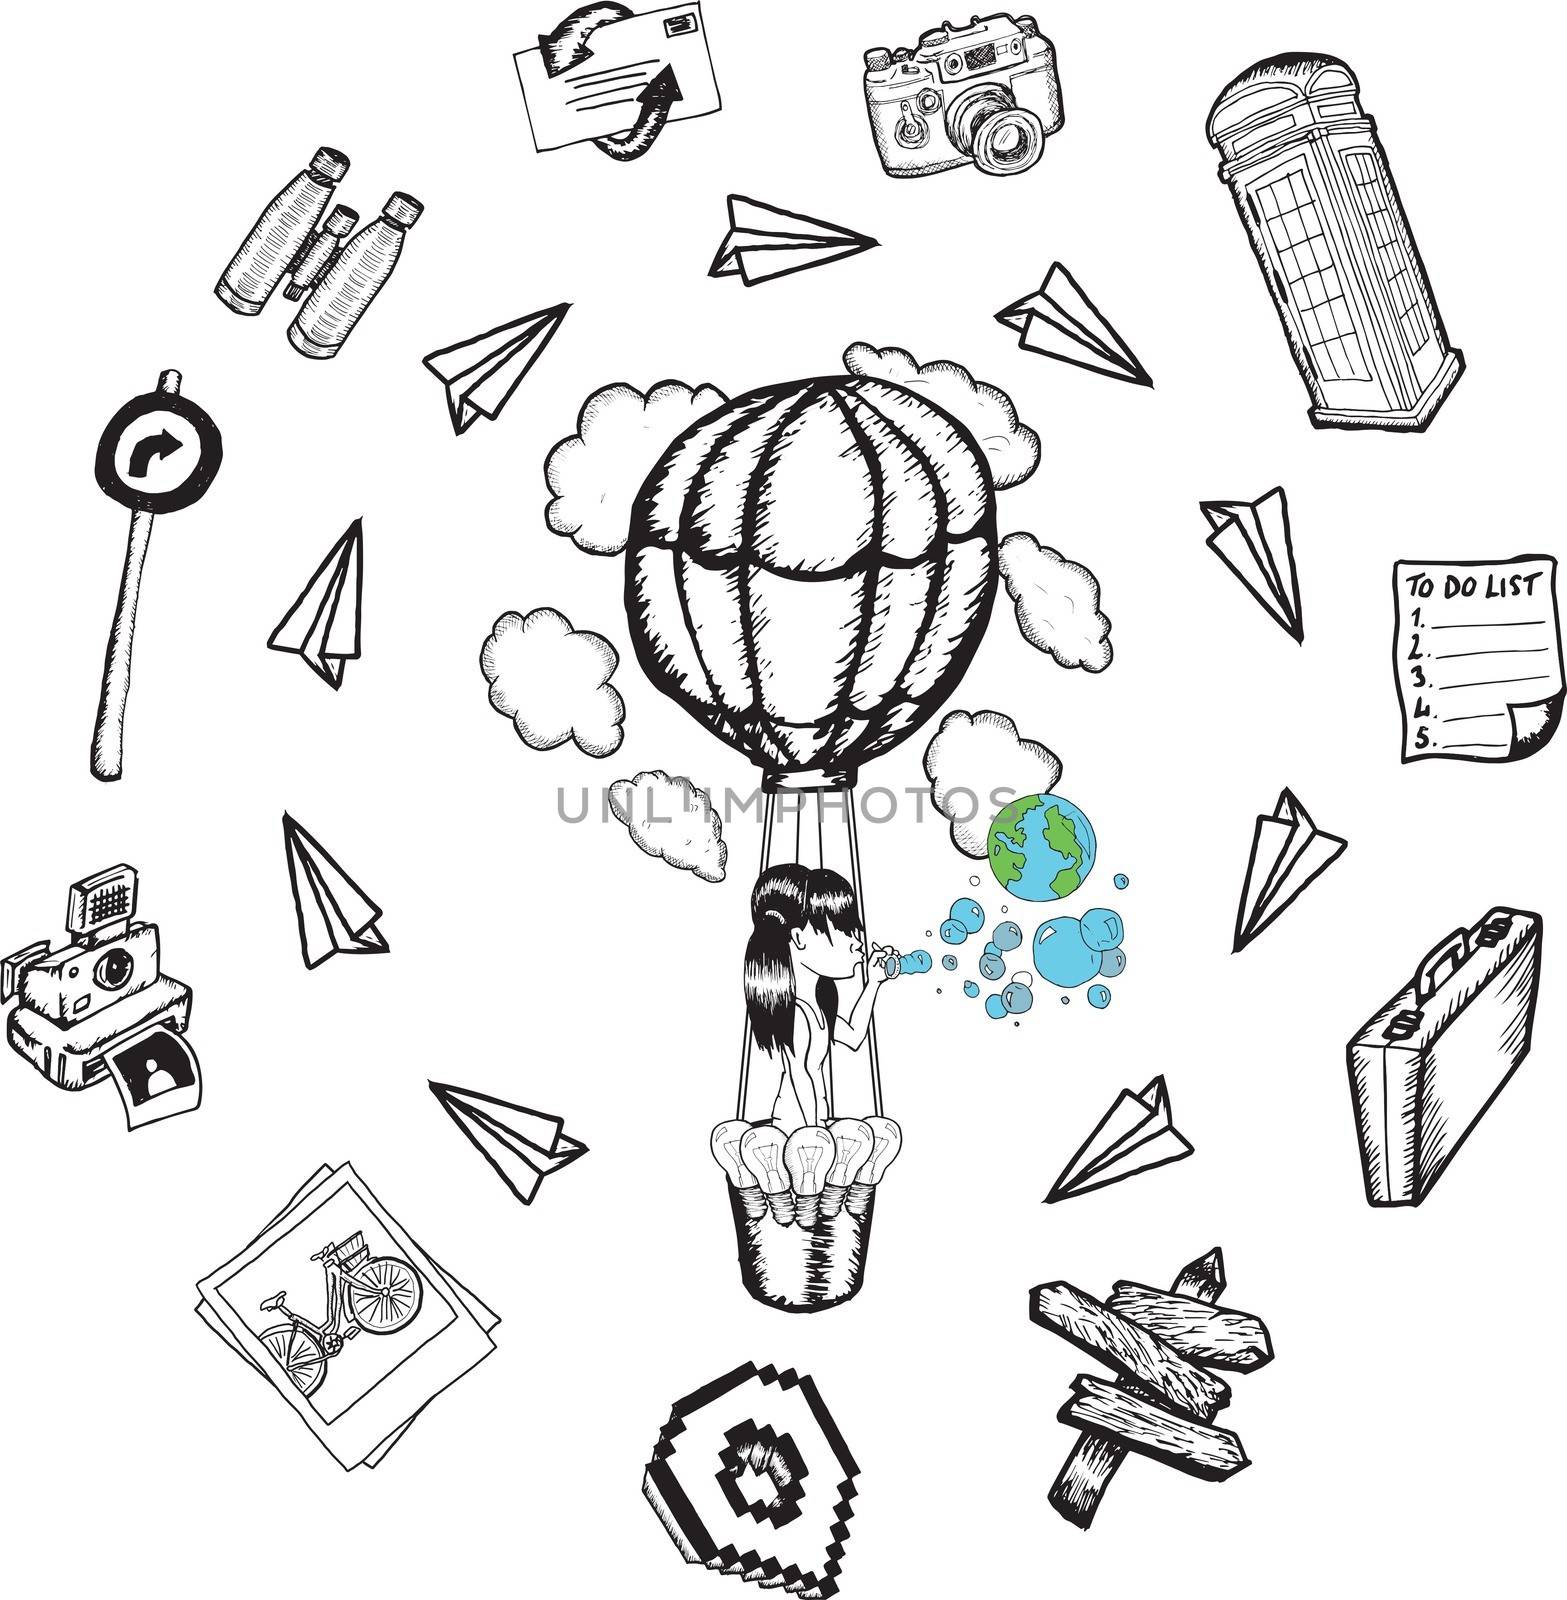 Hot air balloon with lifestyle doodles by Wavebreakmedia